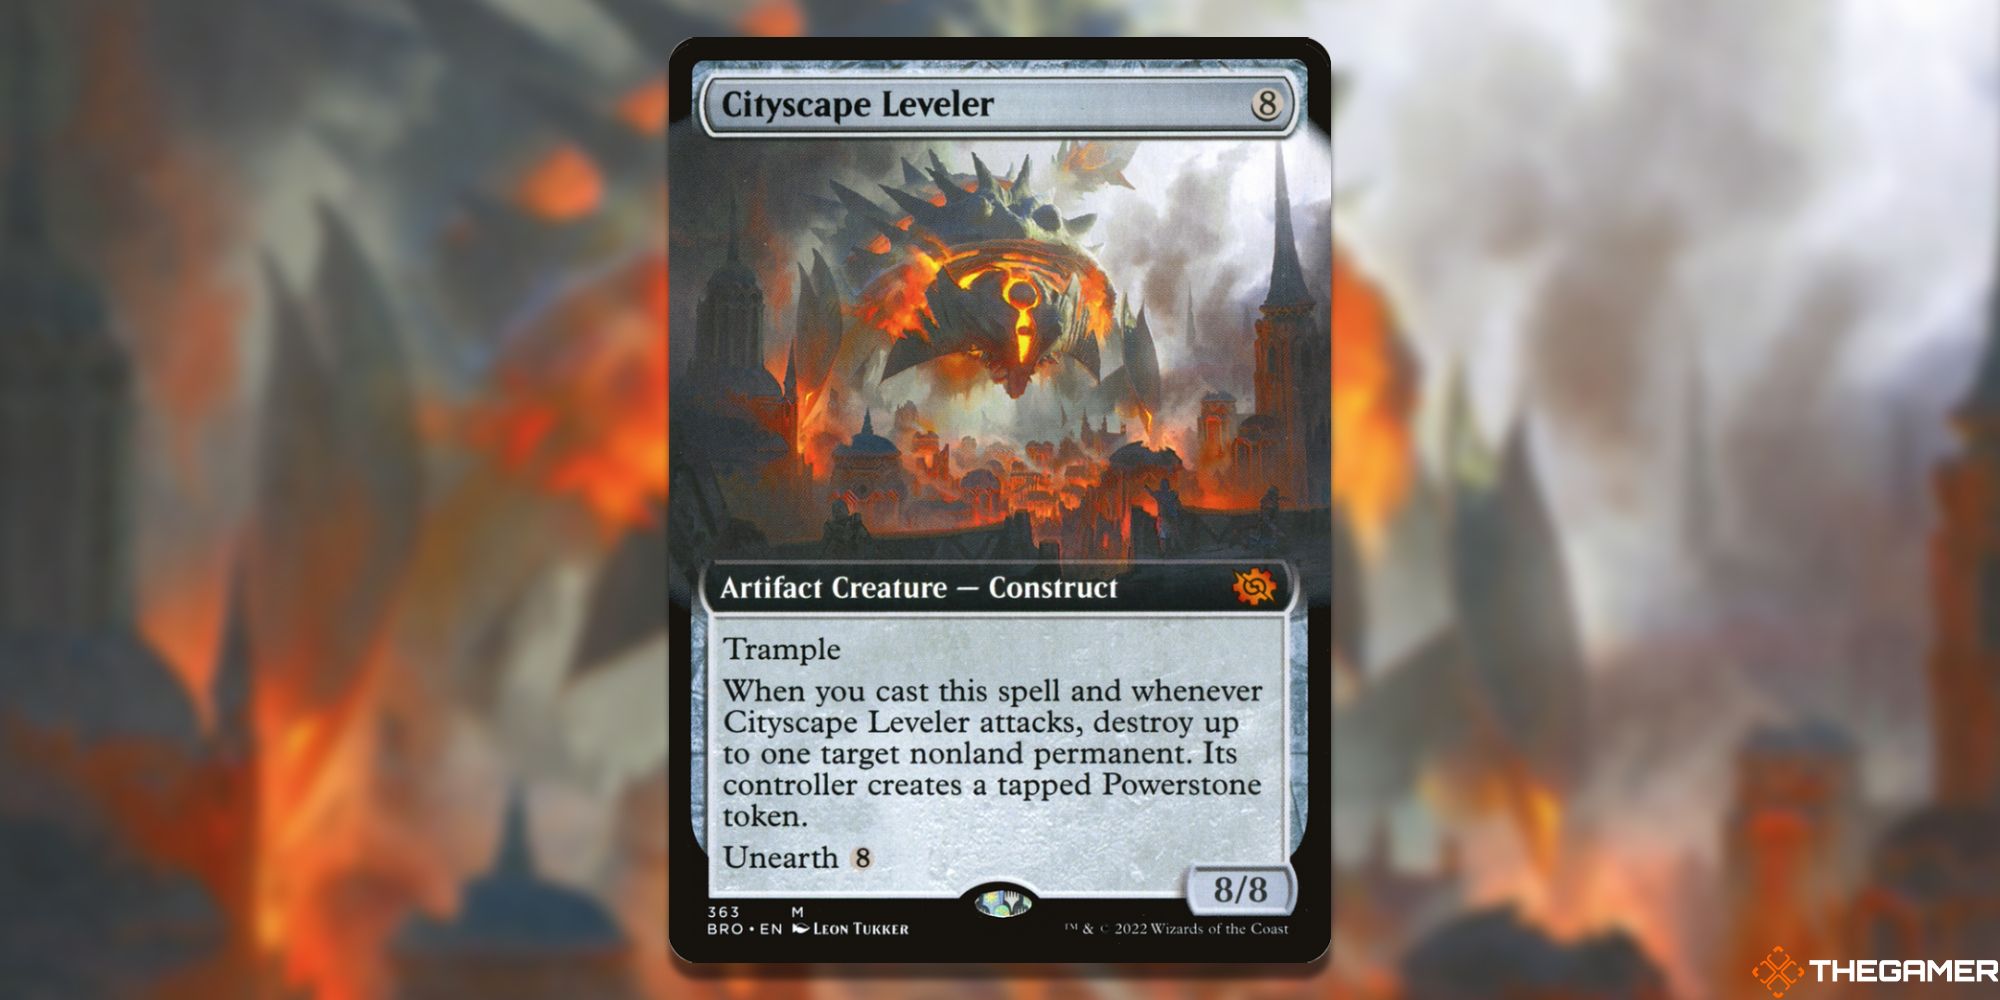 Image of the Cityscape Leveler card in Magic: The Gathering, with art by Leon Tukker